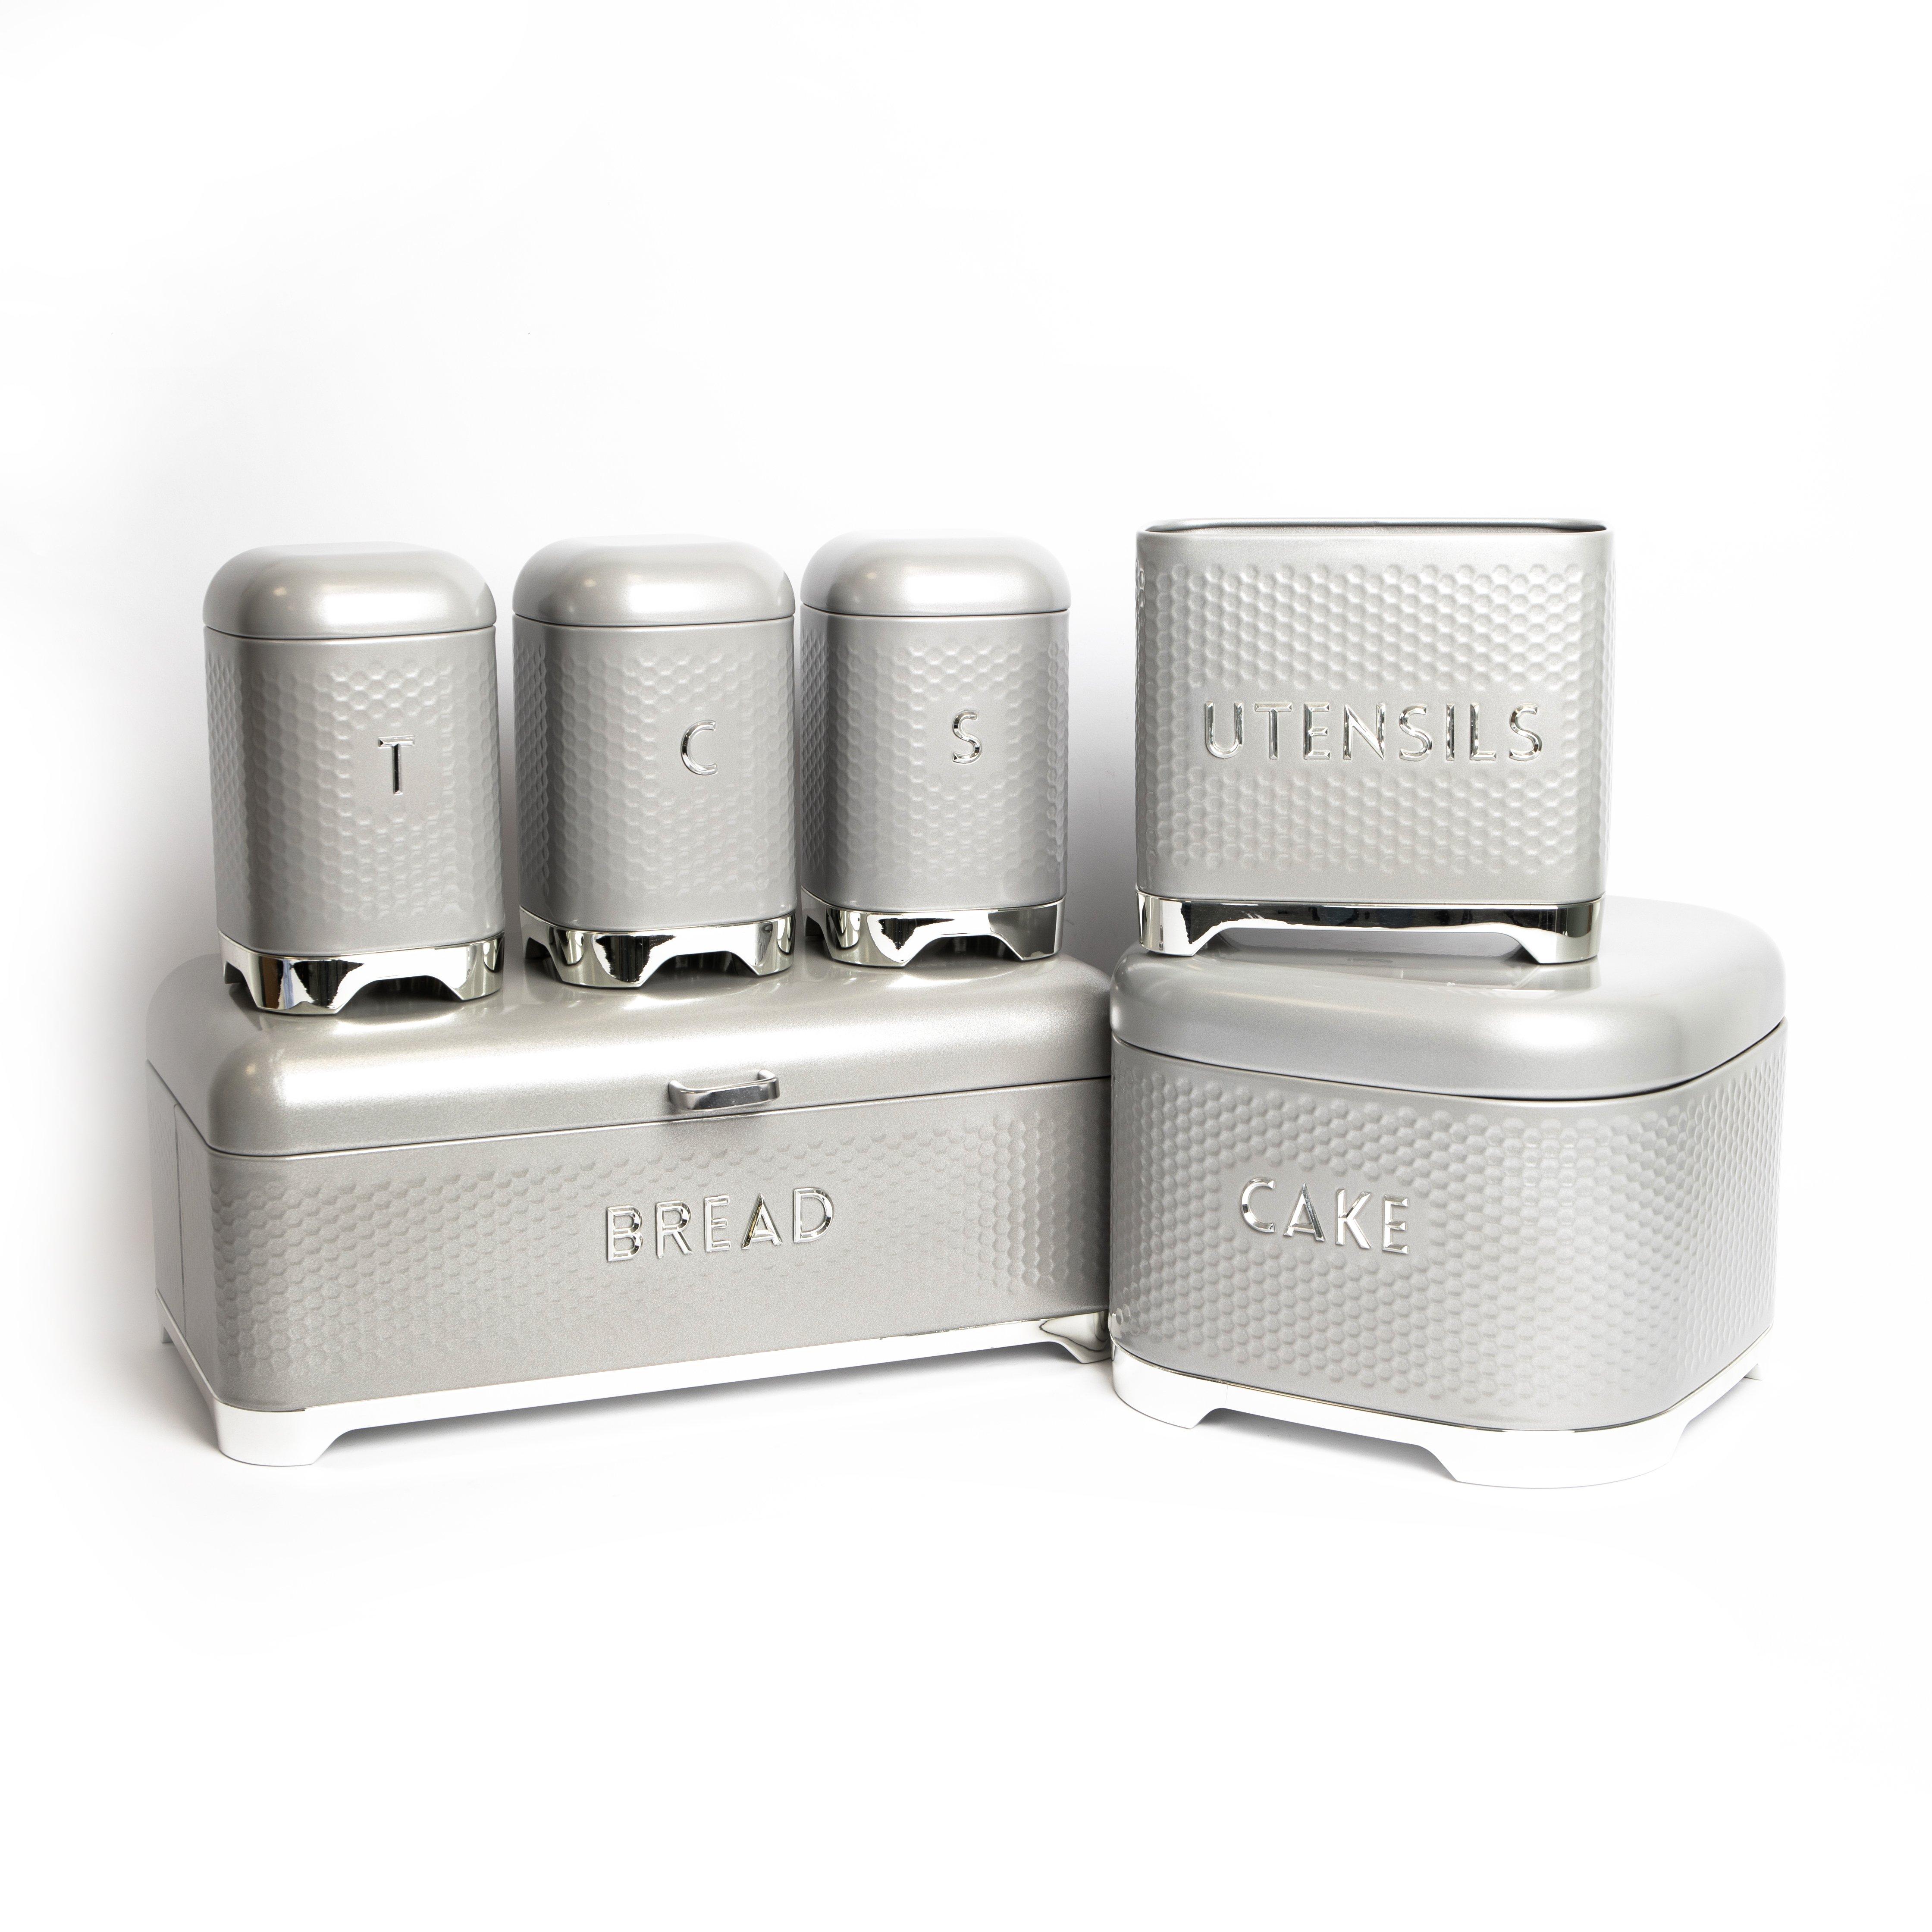 6pc Gift-Boxed Shadow Grey Storage Set with Tea, Coffee & Sugar Canisters, Utensil Store, Cake Tin a